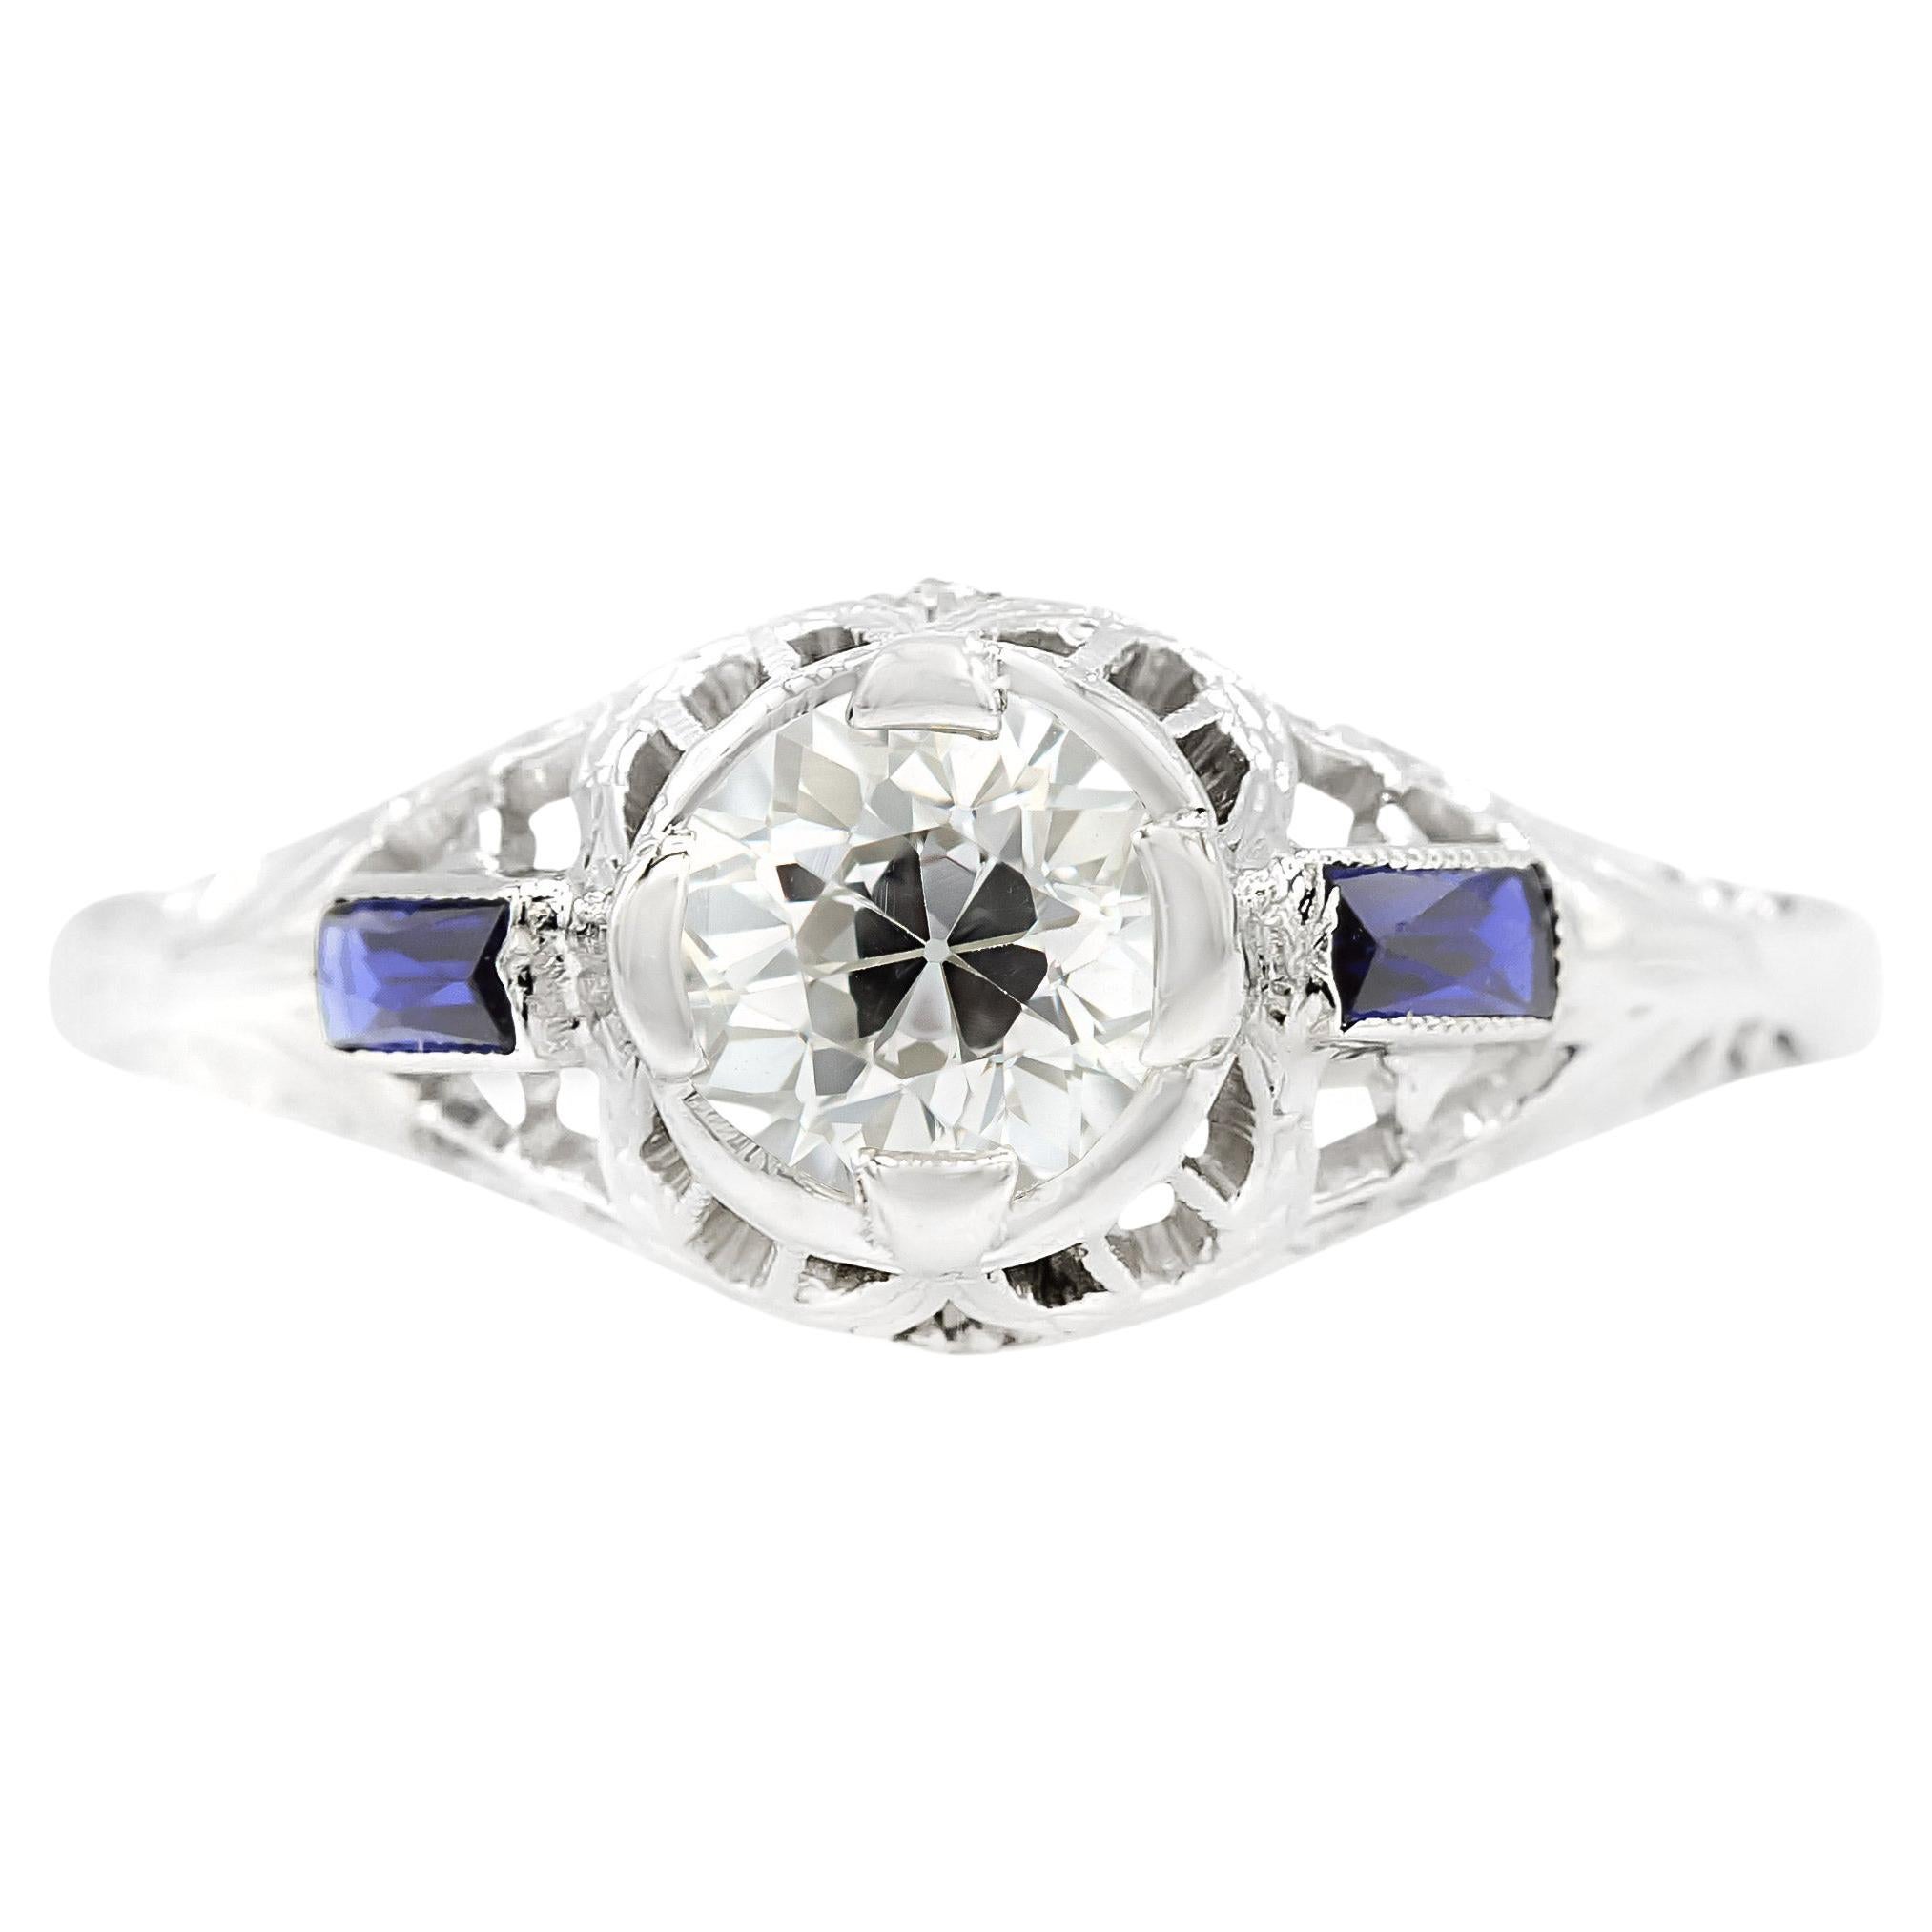 Art Deco GIA Certified 0.50 Ct. Diamond and Sapphire Engagement Ring H VS1